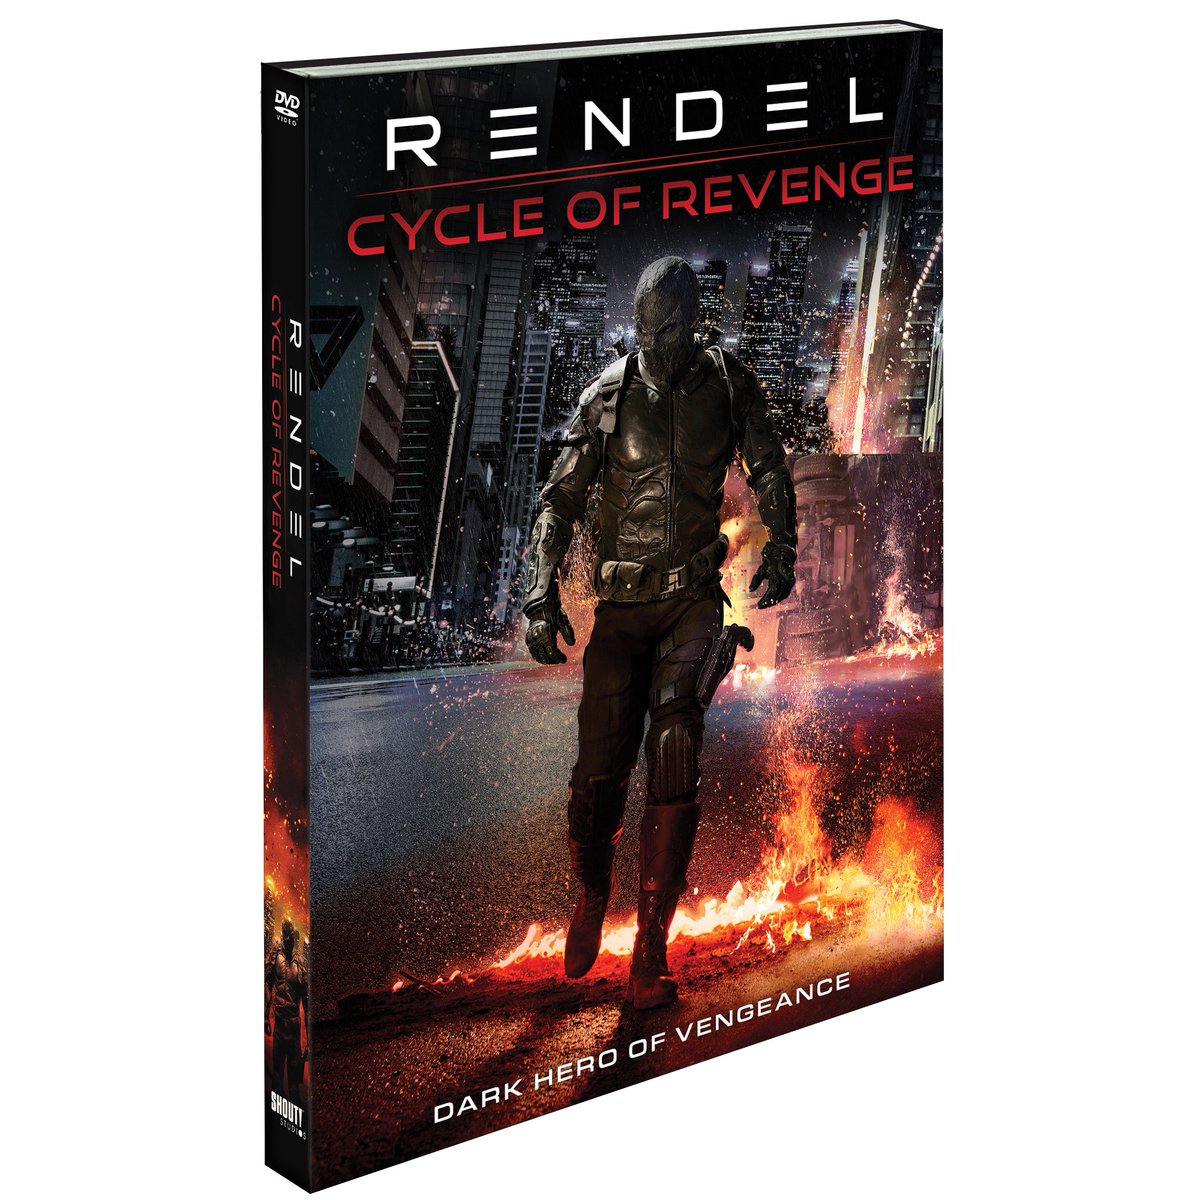 The brutal superhero from Finland is back in RENDEL: CYCLE OF REVENGE, coming to DVD July 30. A spiral of violence awakens the ghosts of the past and pushes the mysterious vigilante to the edge in his battle against corporate evil. shoutfactory.com/products/rende…